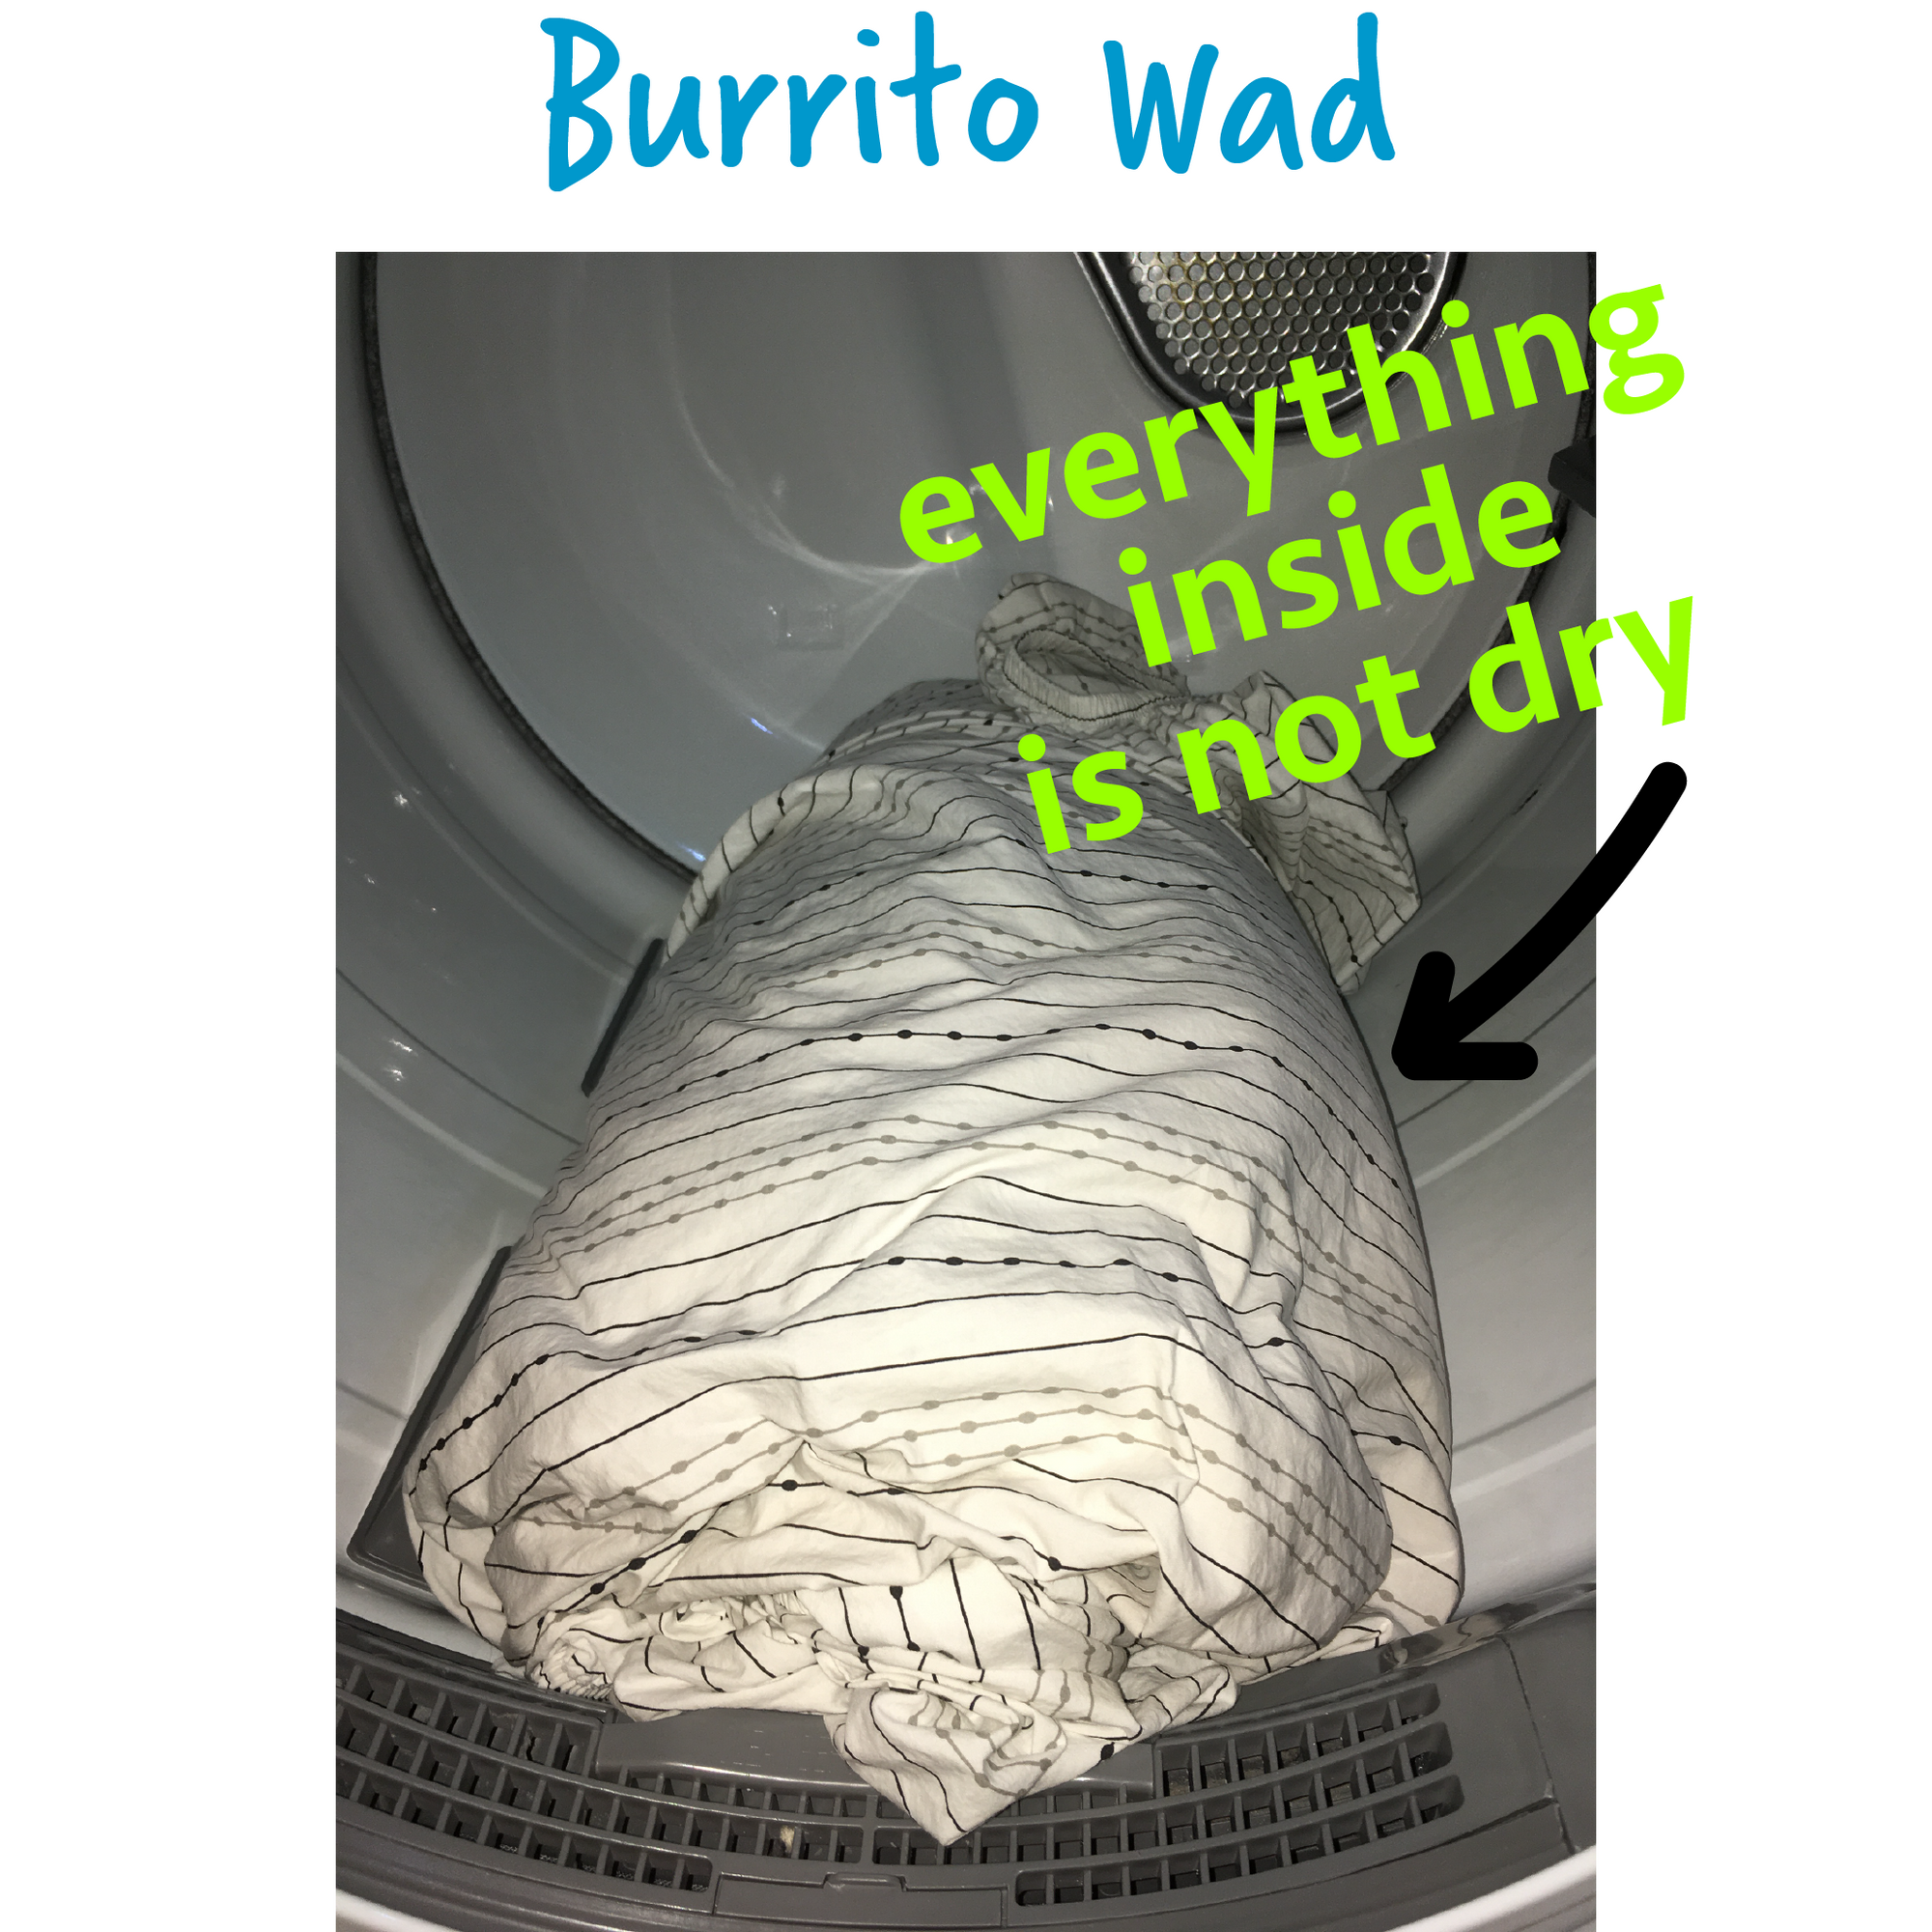 Wad-Free solves the Burrito Wad or ballsack of sheets where one sheet is wrapped around other items in the dryer and the items trapped inside are not dry